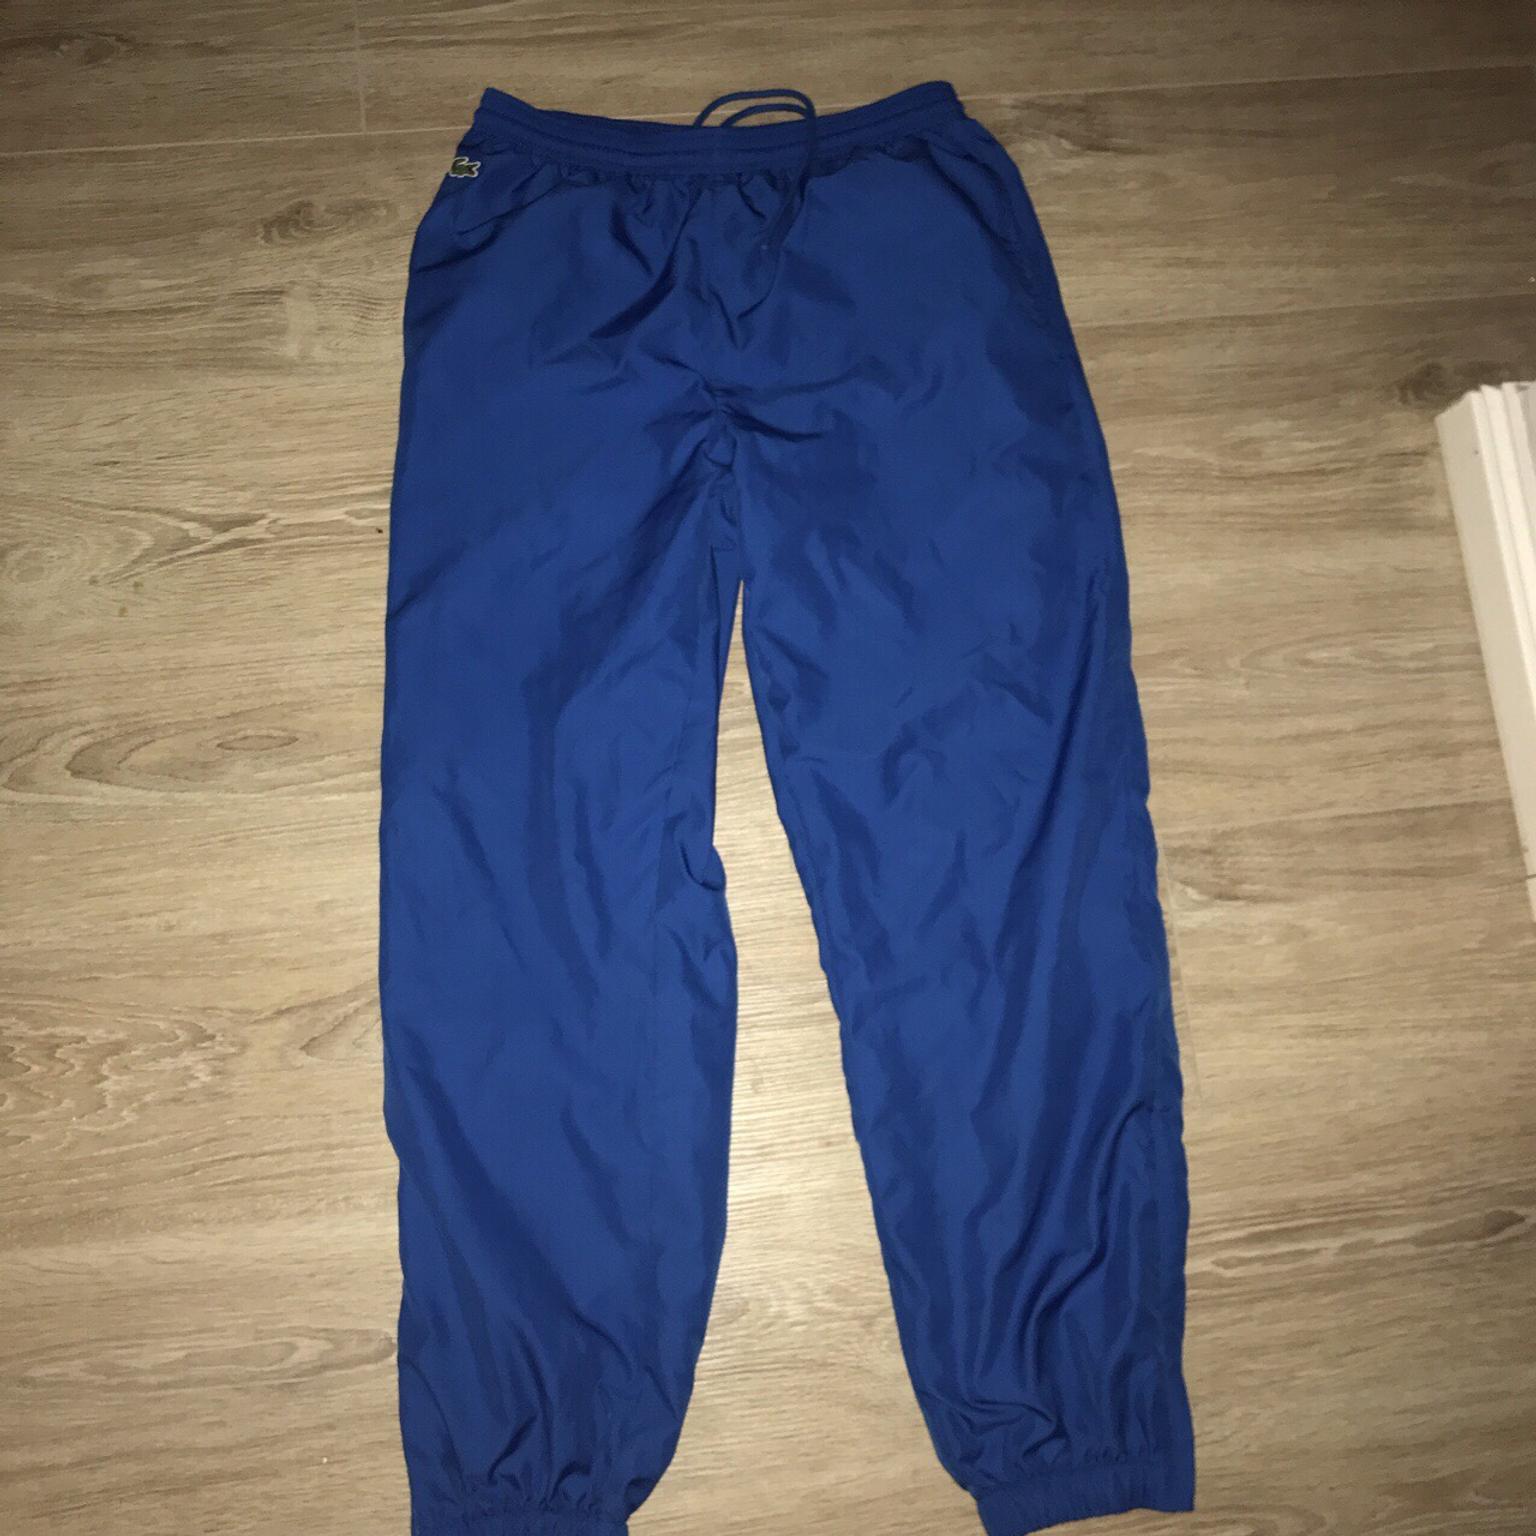 lacoste guppy track pants,Save up to 19%,www.ilcascinone.com